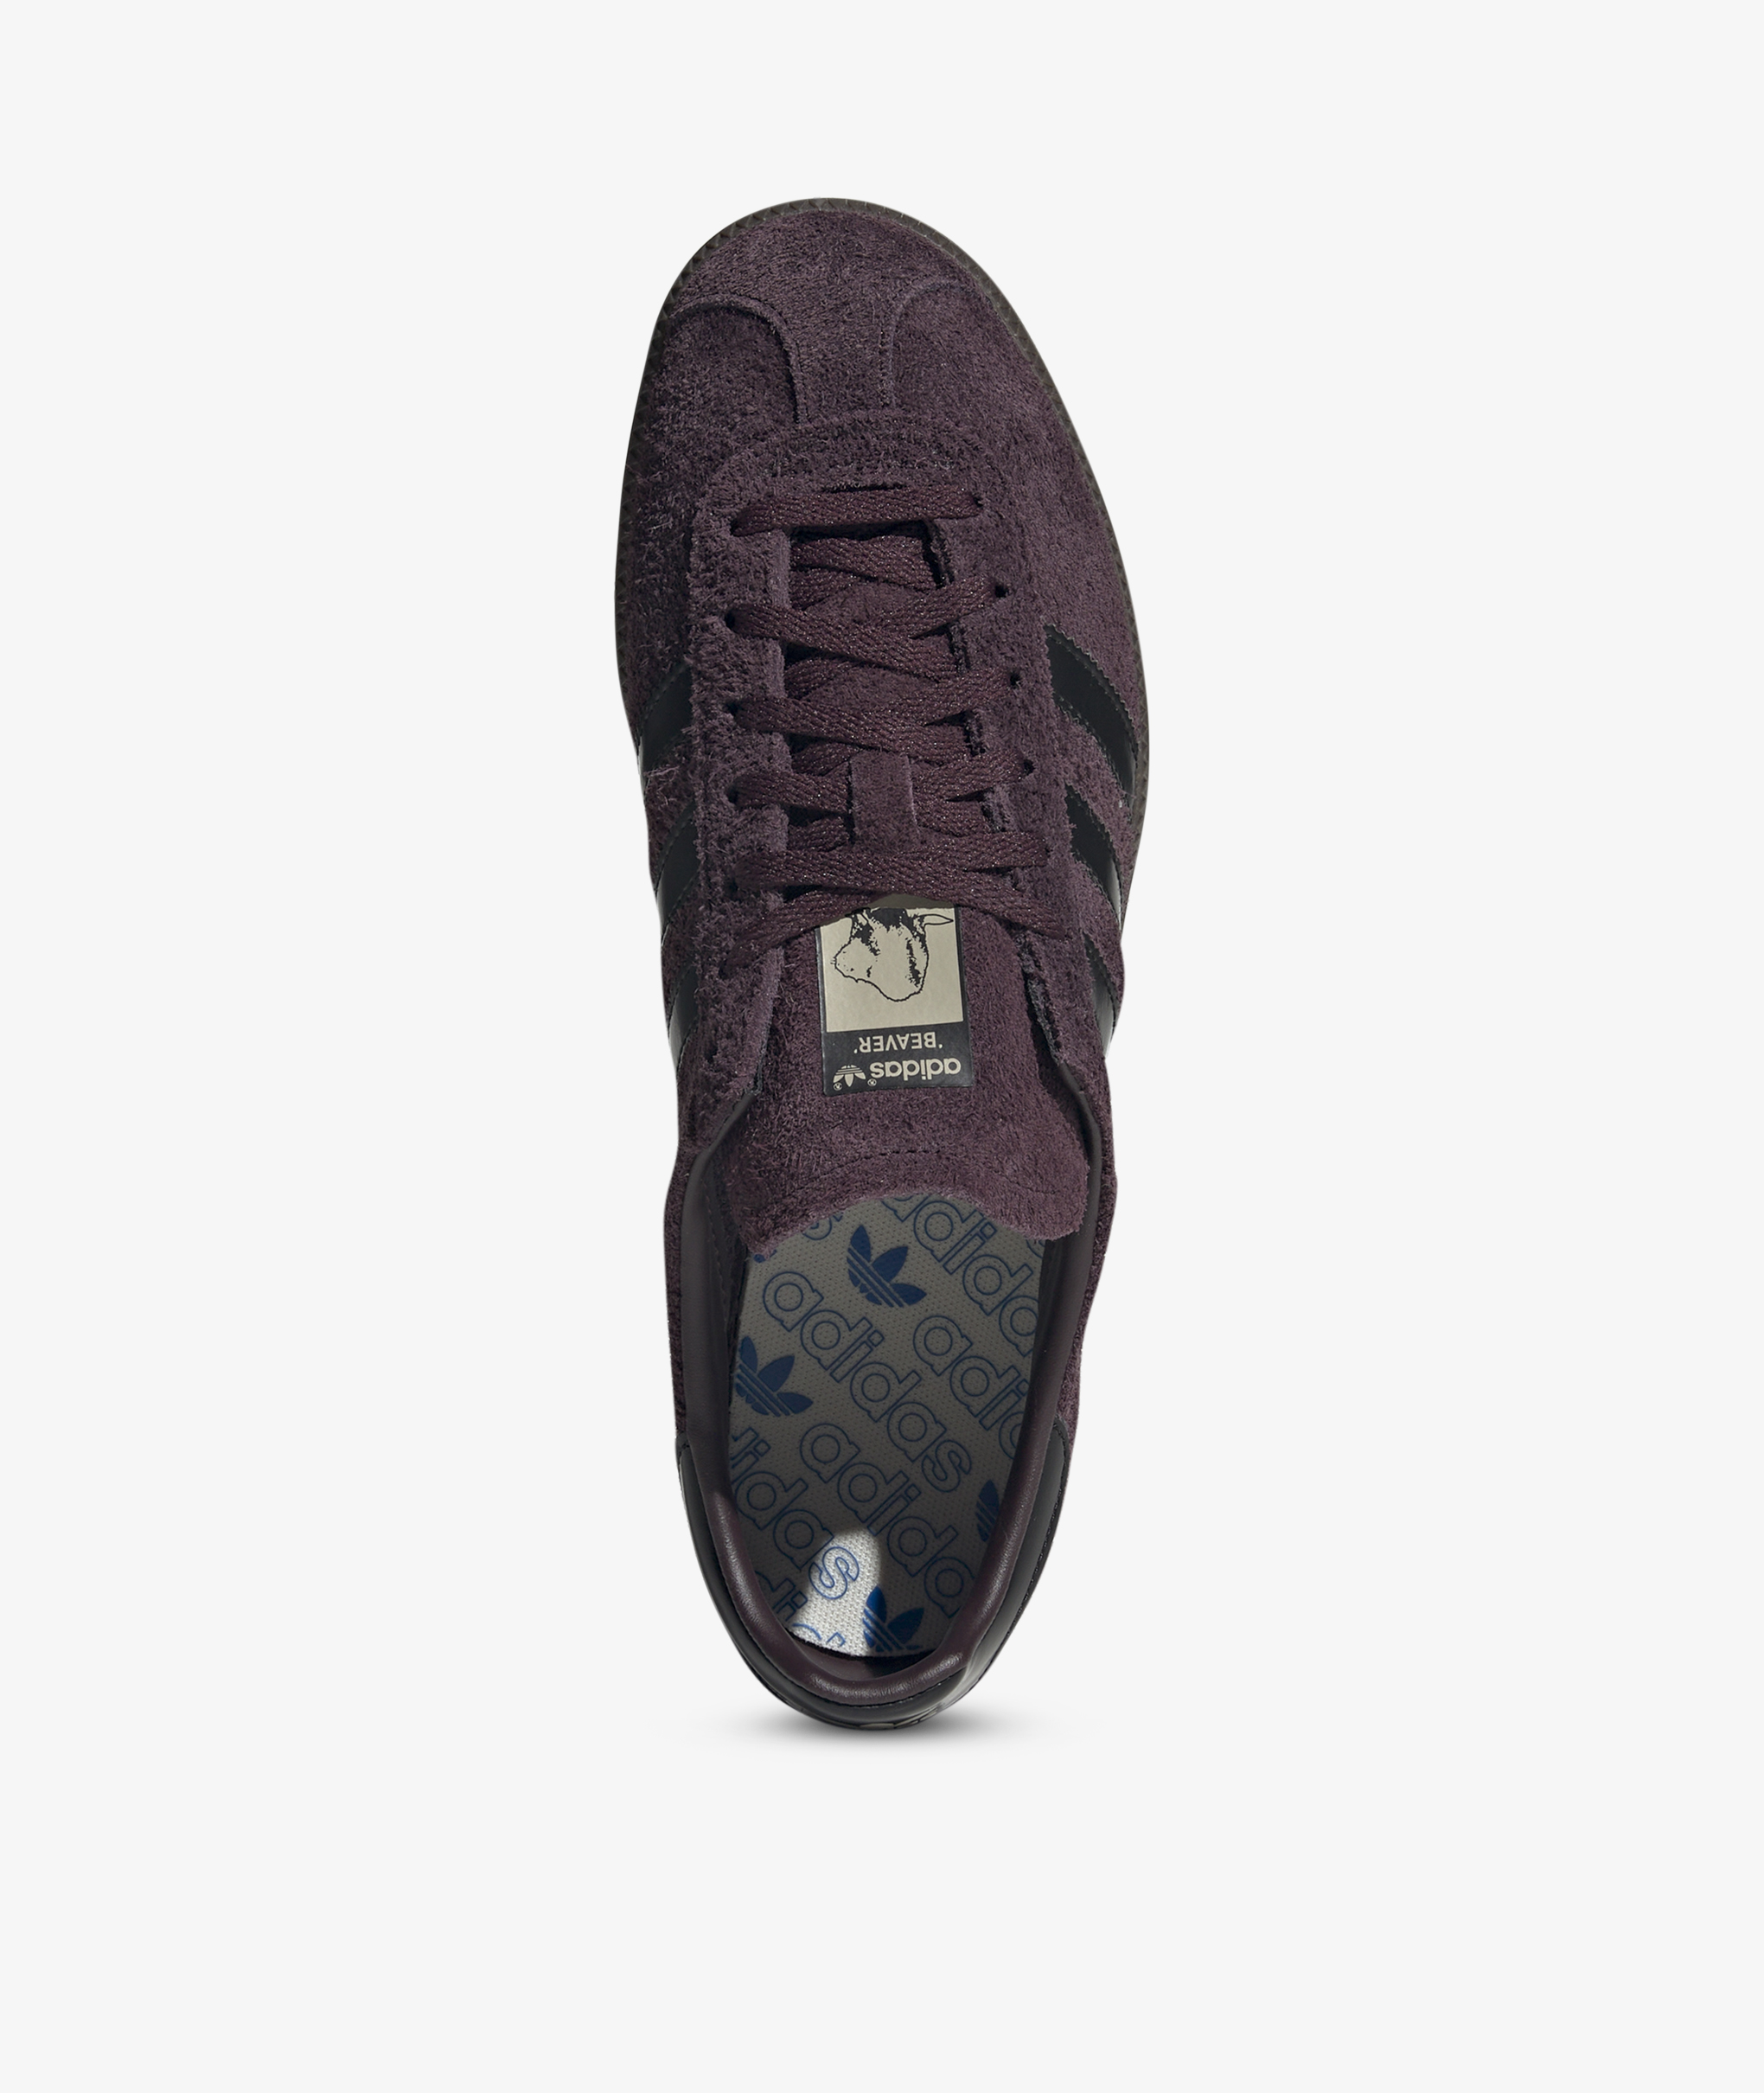 Norse Store | Shipping Worldwide - adidas Originals STATE SERIES ...